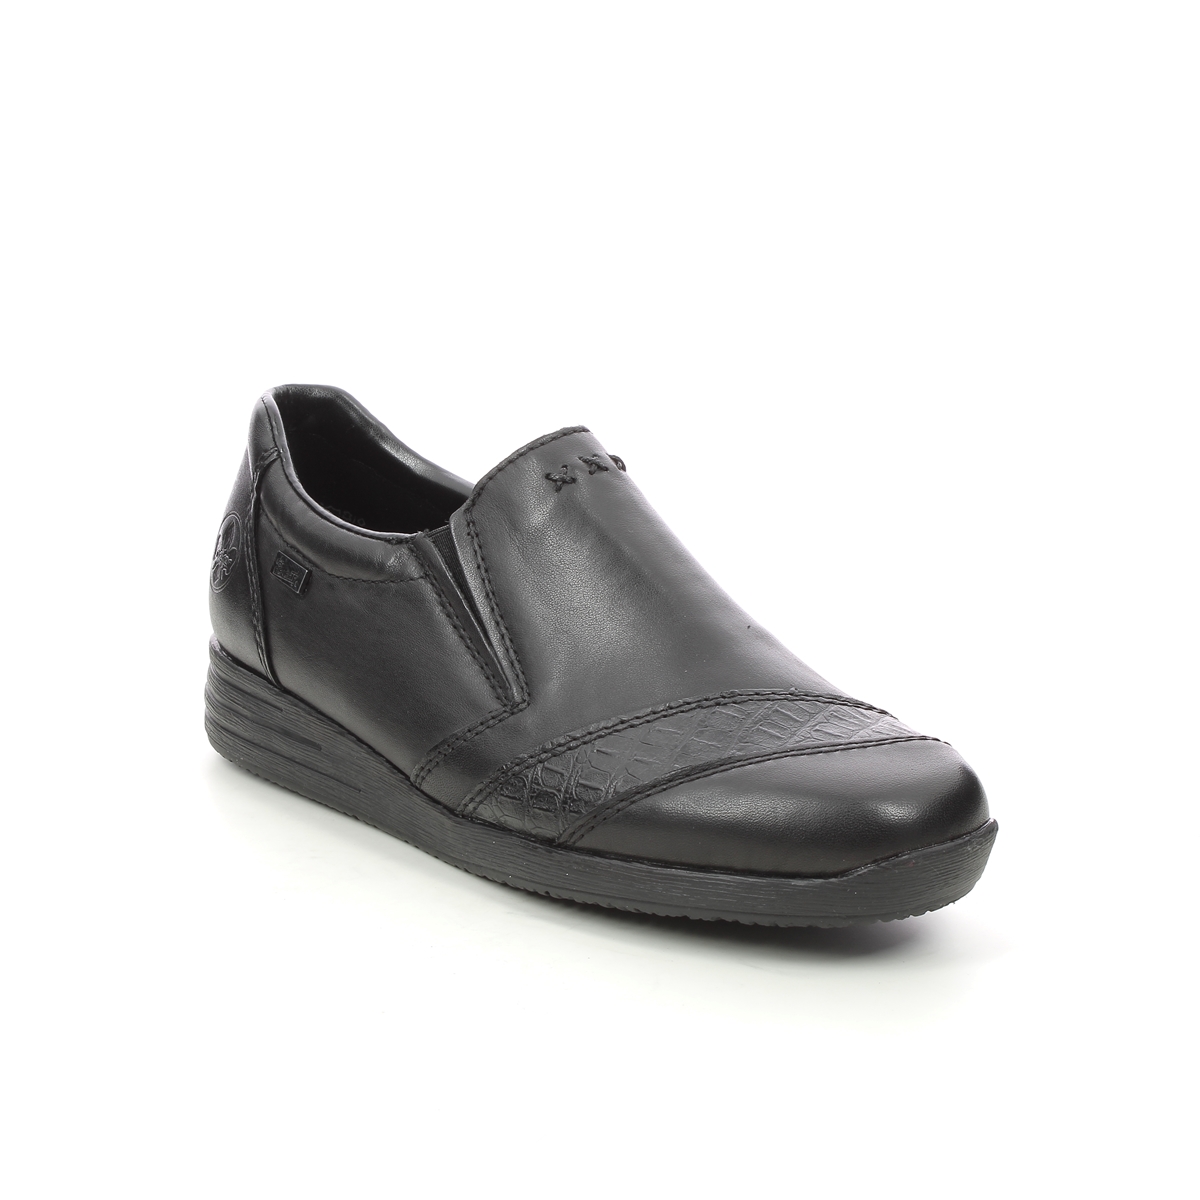 Rieker Bodica Tex Black Leather Womens Comfort Slip On Shoes 58462-00 In Size 41 In Plain Black Leather